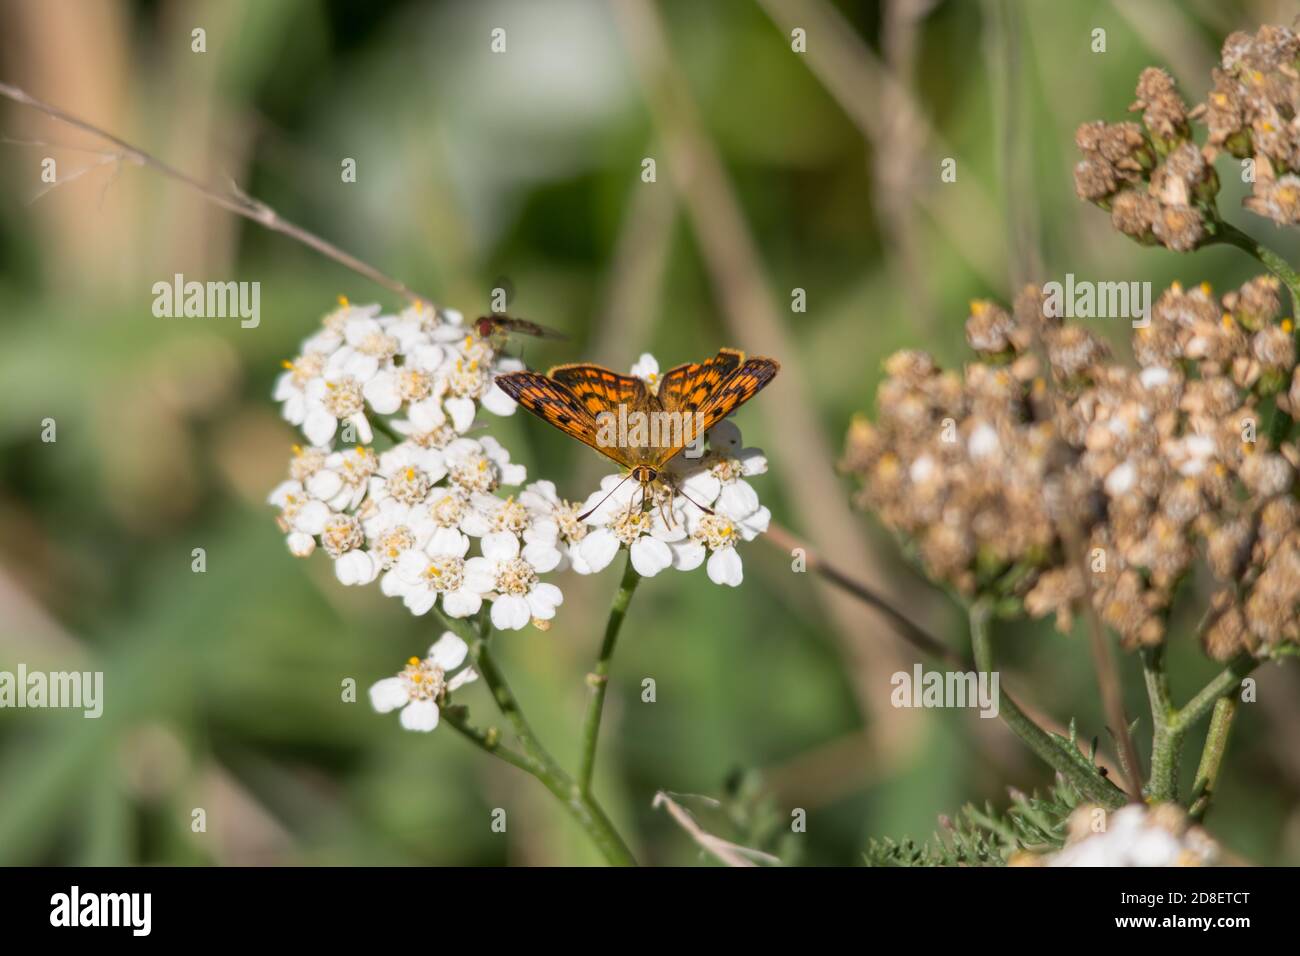 Lycaena salustius, the Common Copper, is a butterfly of the family Lycaenidae. It is found in New Zealand. Stock Photo